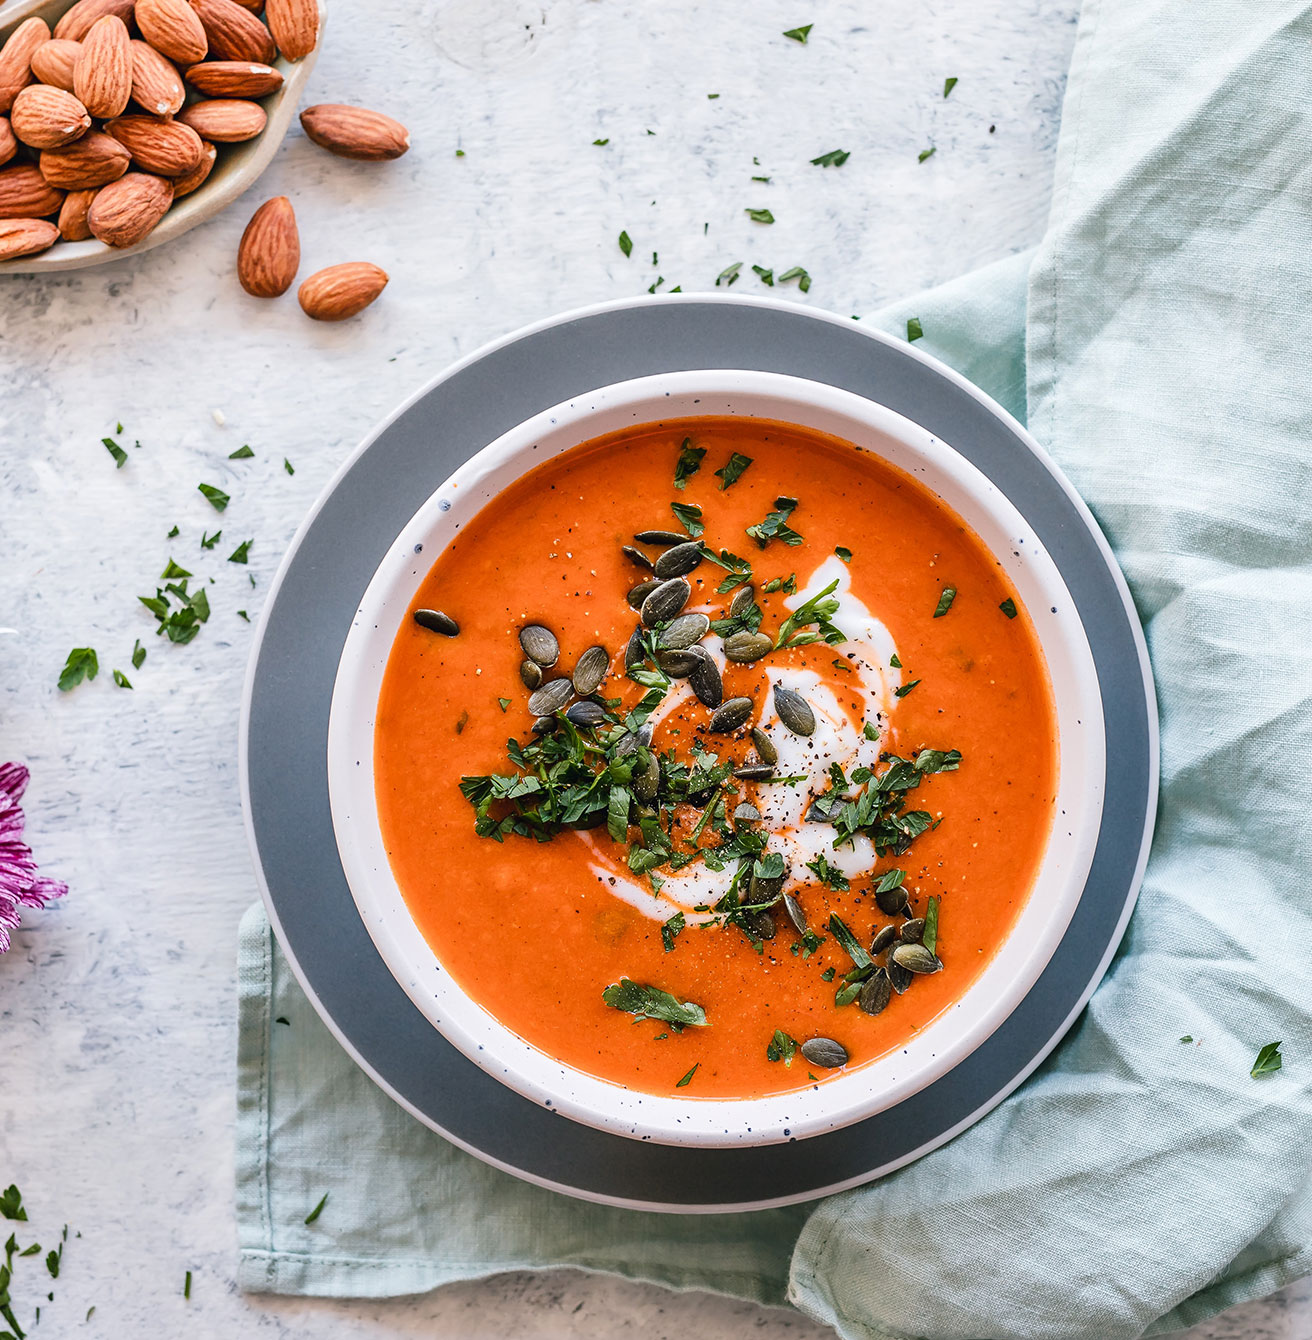 Pumpkin soup with grilled almonds